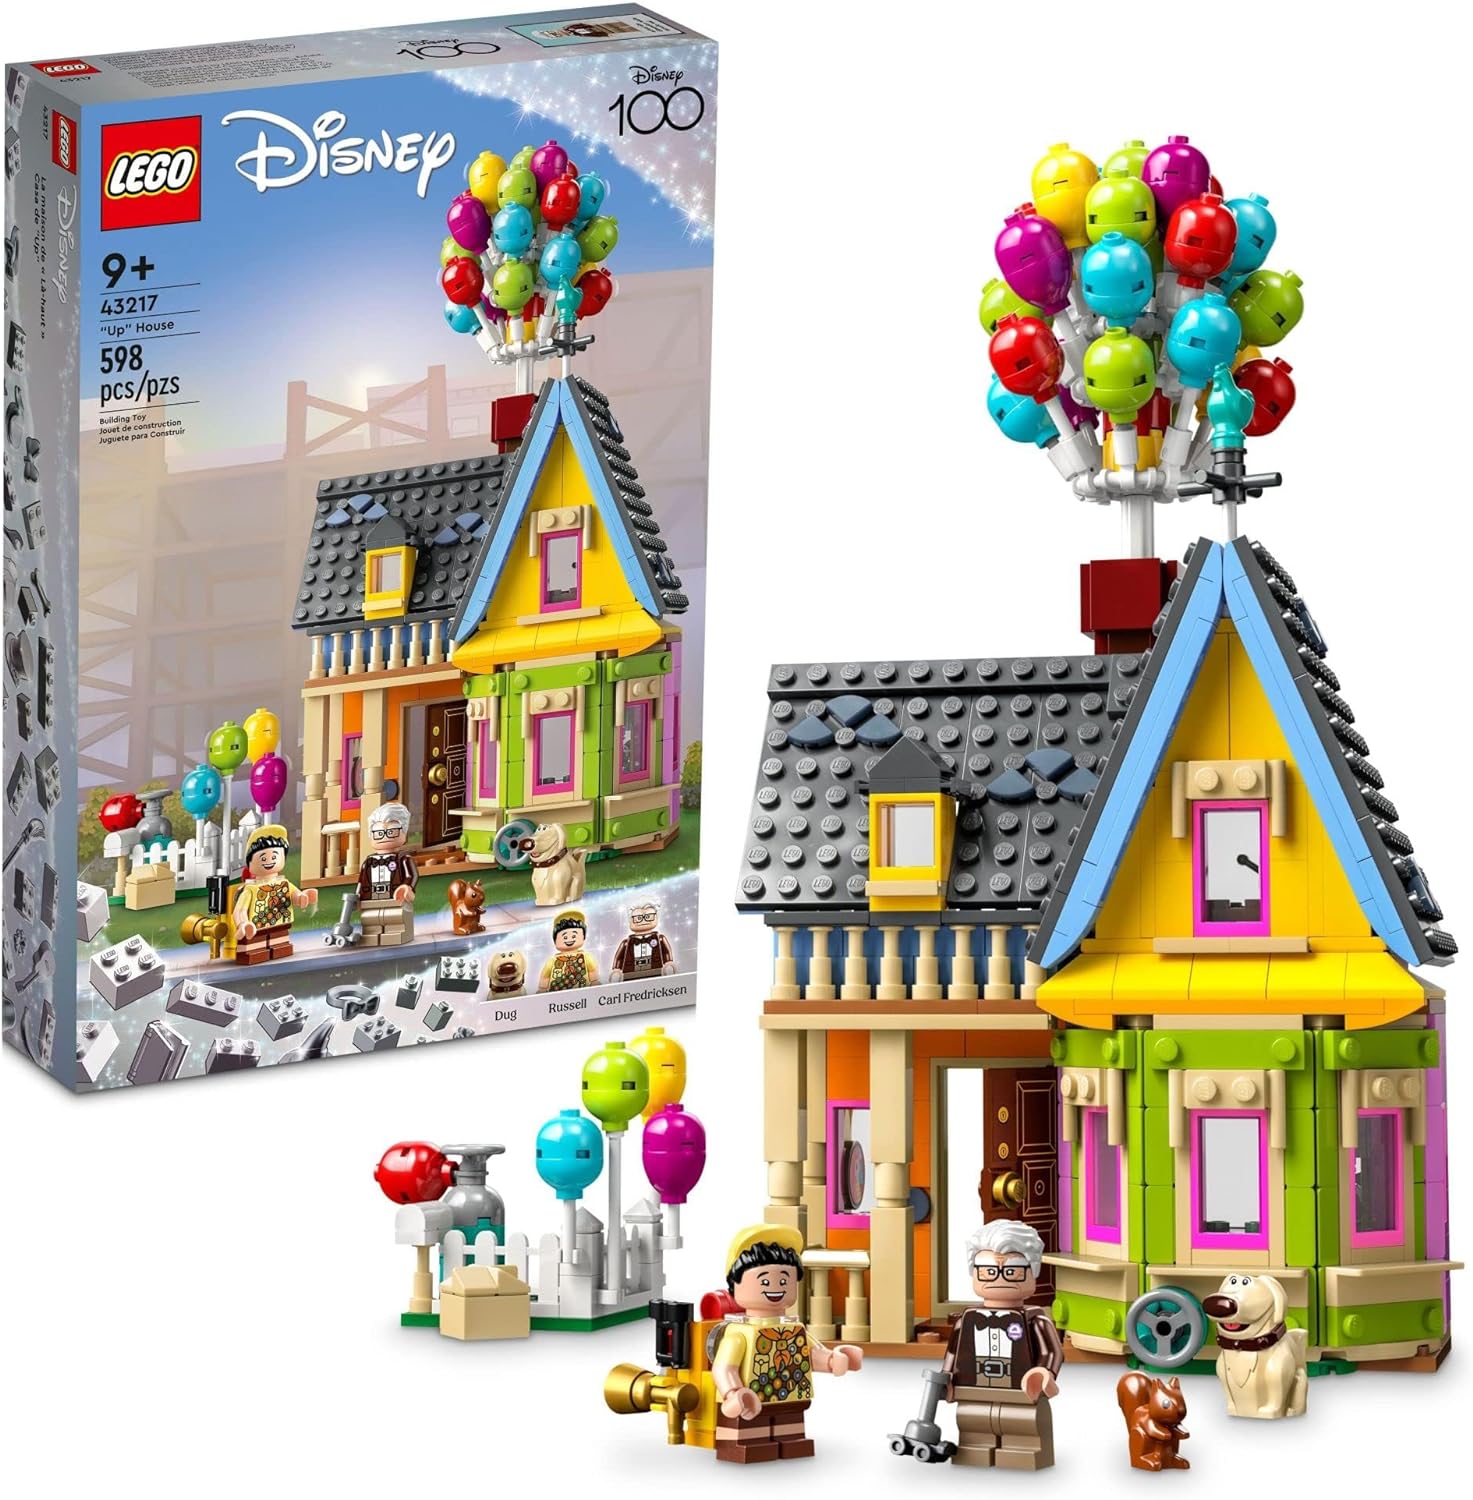 598-Piece LEGO Disney and Pixar ‘Up’ House 43217 $48 + Free Shipping